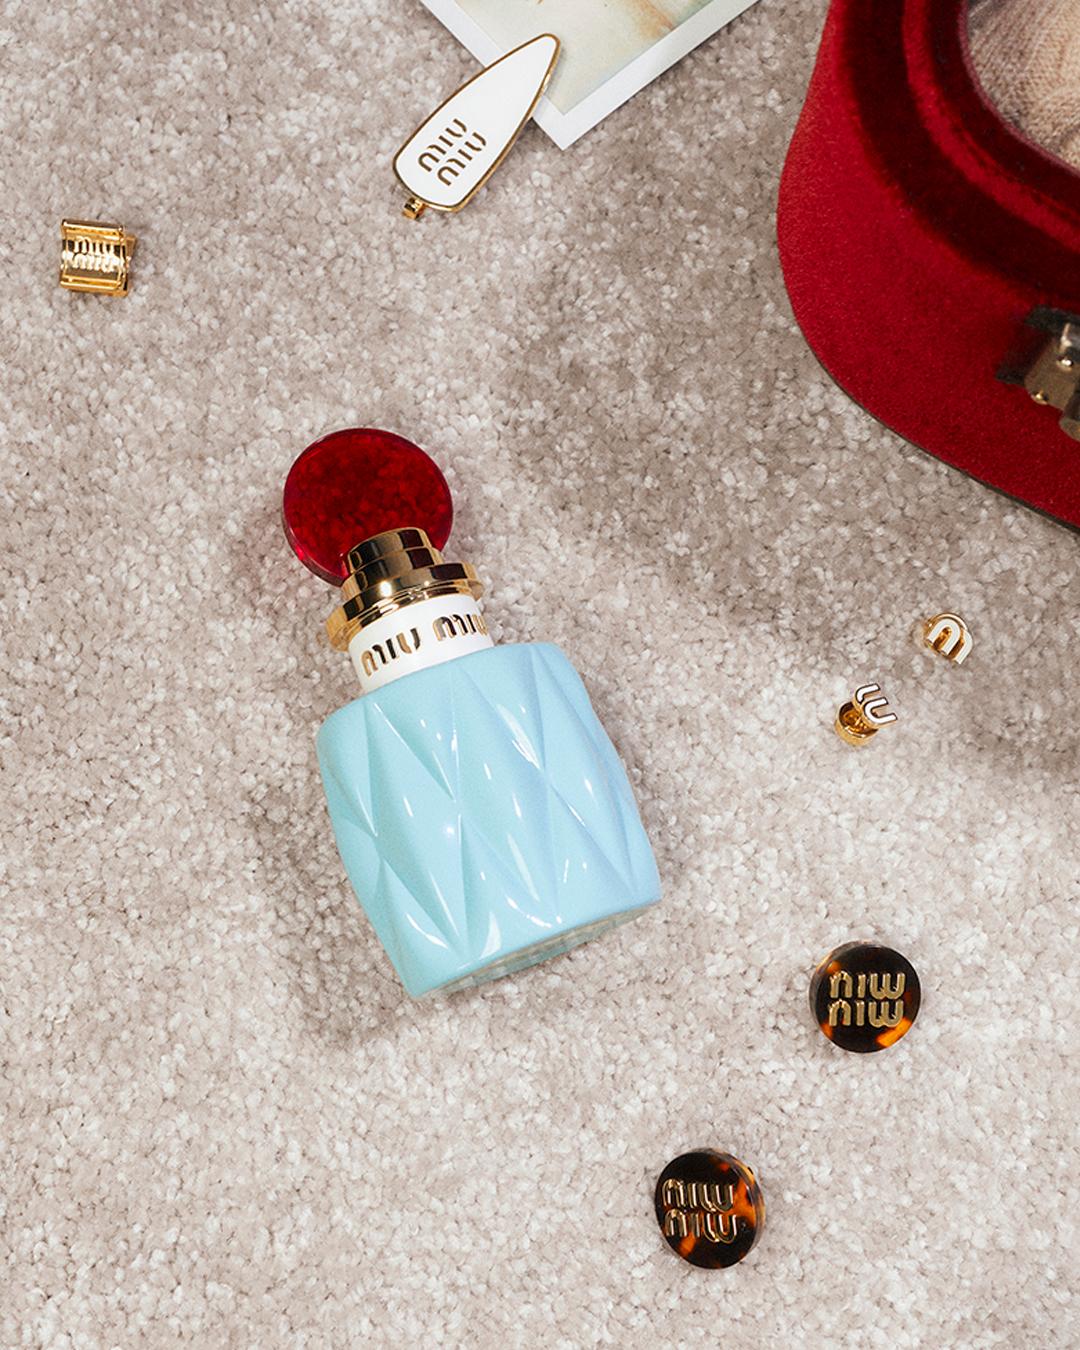 A blue bottle of perfume next to a red hat

Description automatically generated